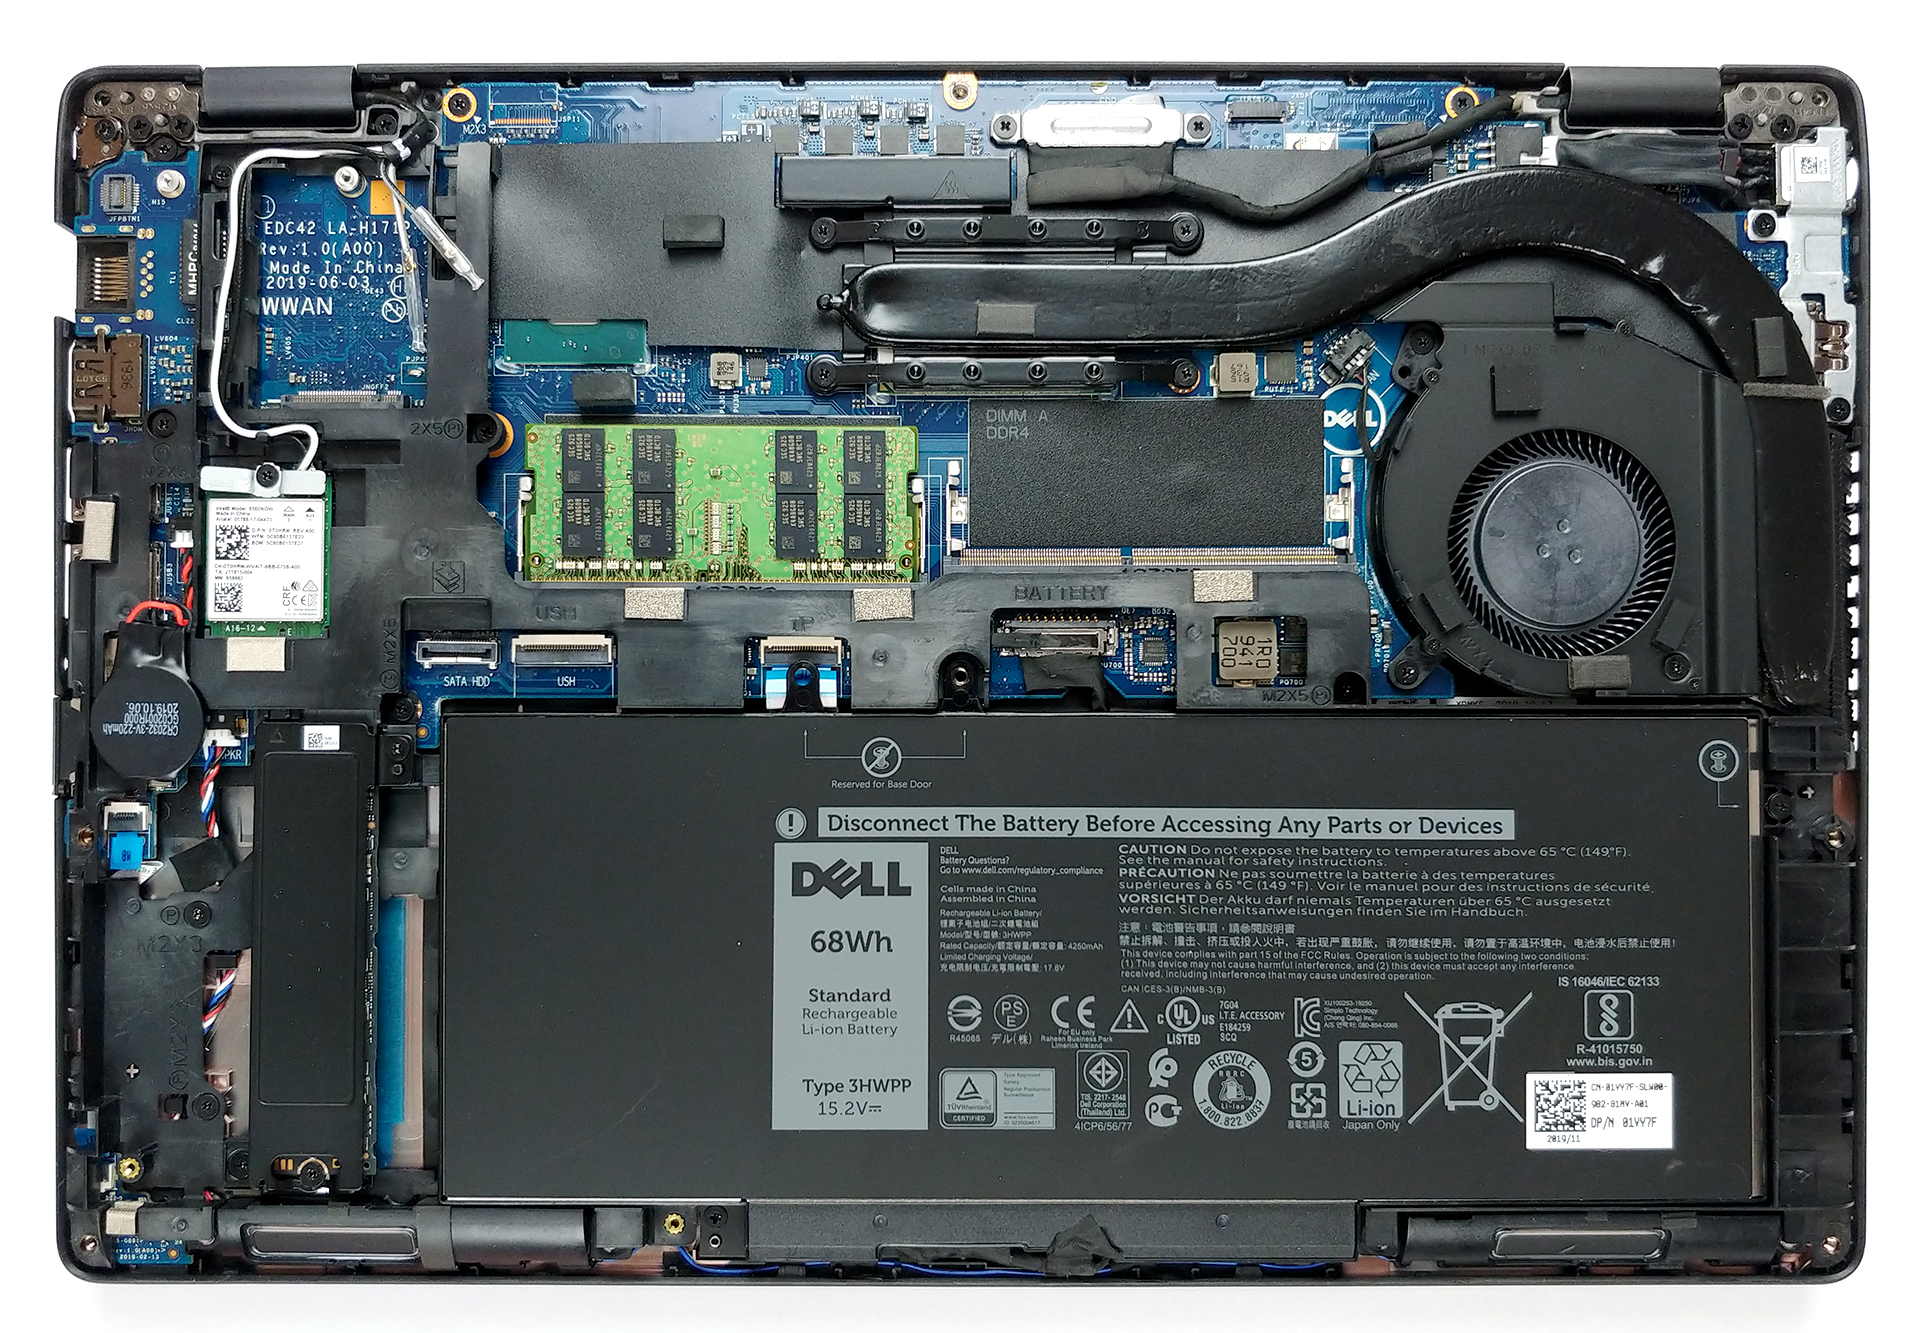 Inside Dell Latitude 5401 - disassembly and upgrade options ...